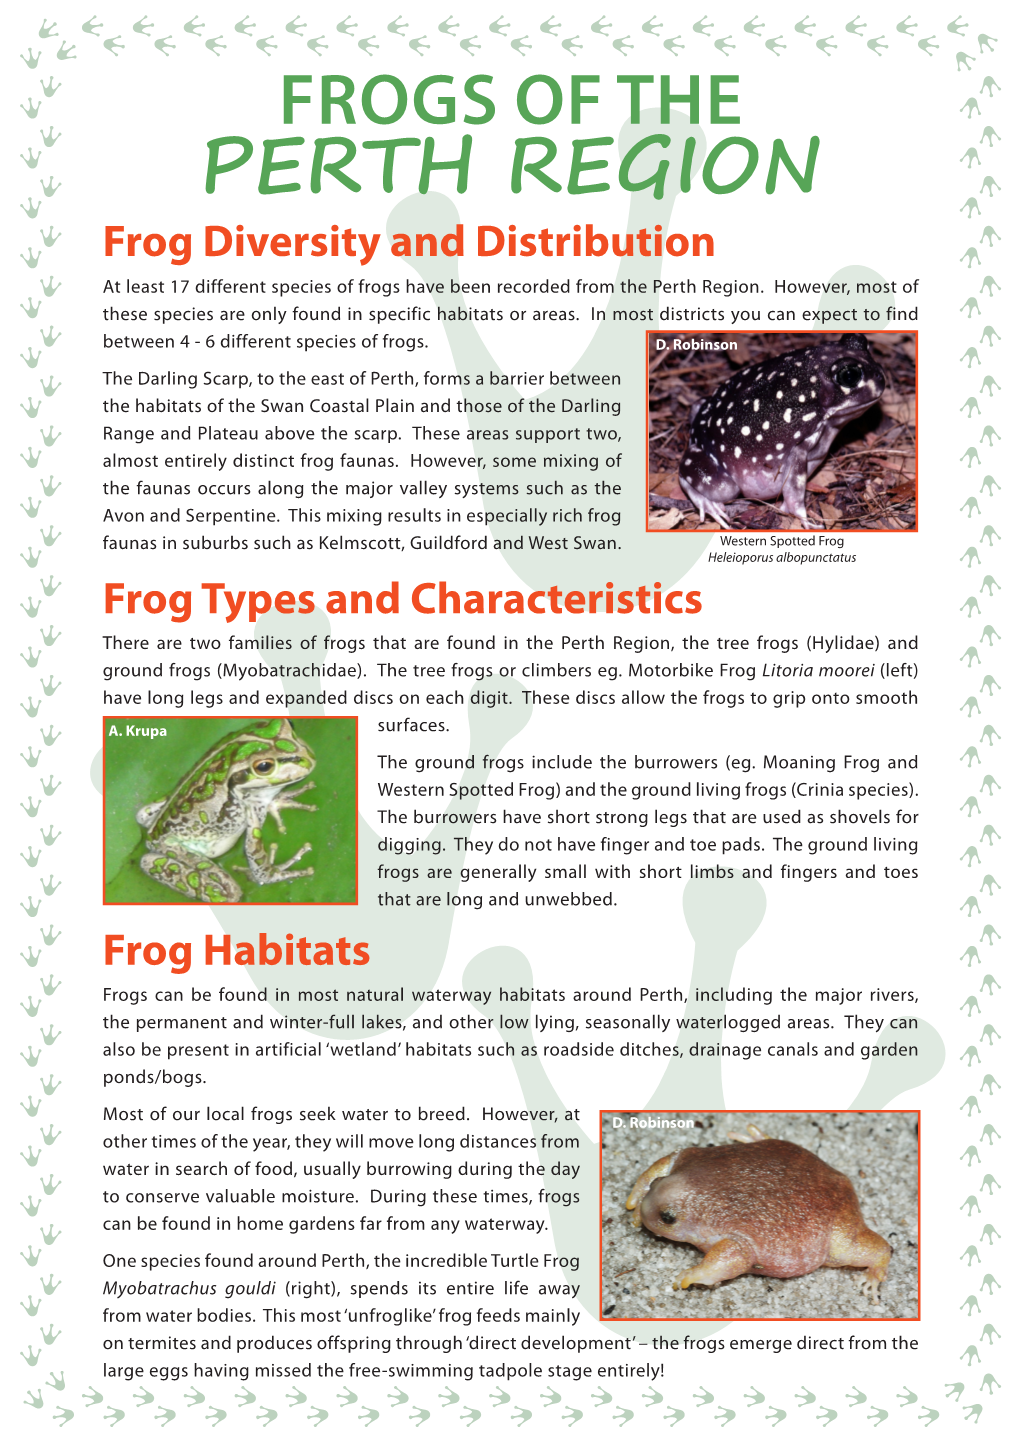 FROGS of the PERTH REGION Frog Diversity and Distribution at Least 17 Different Species of Frogs Have Been Recorded from the Perth Region